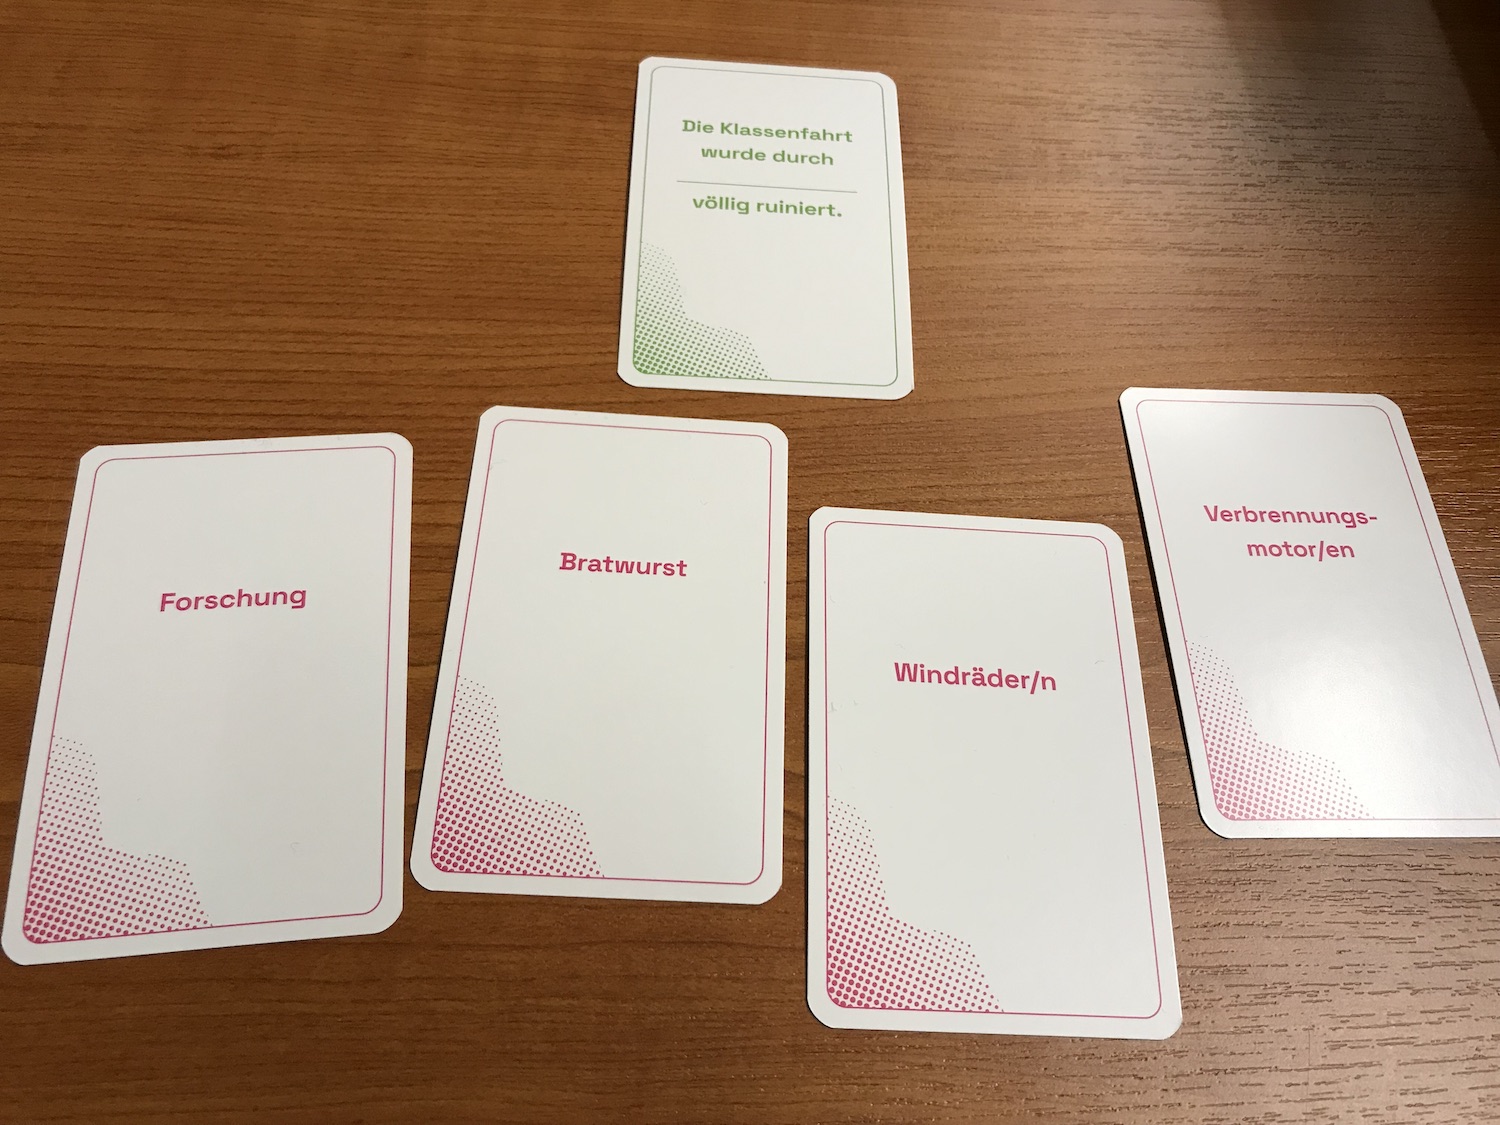 Cards against/for Energiewende